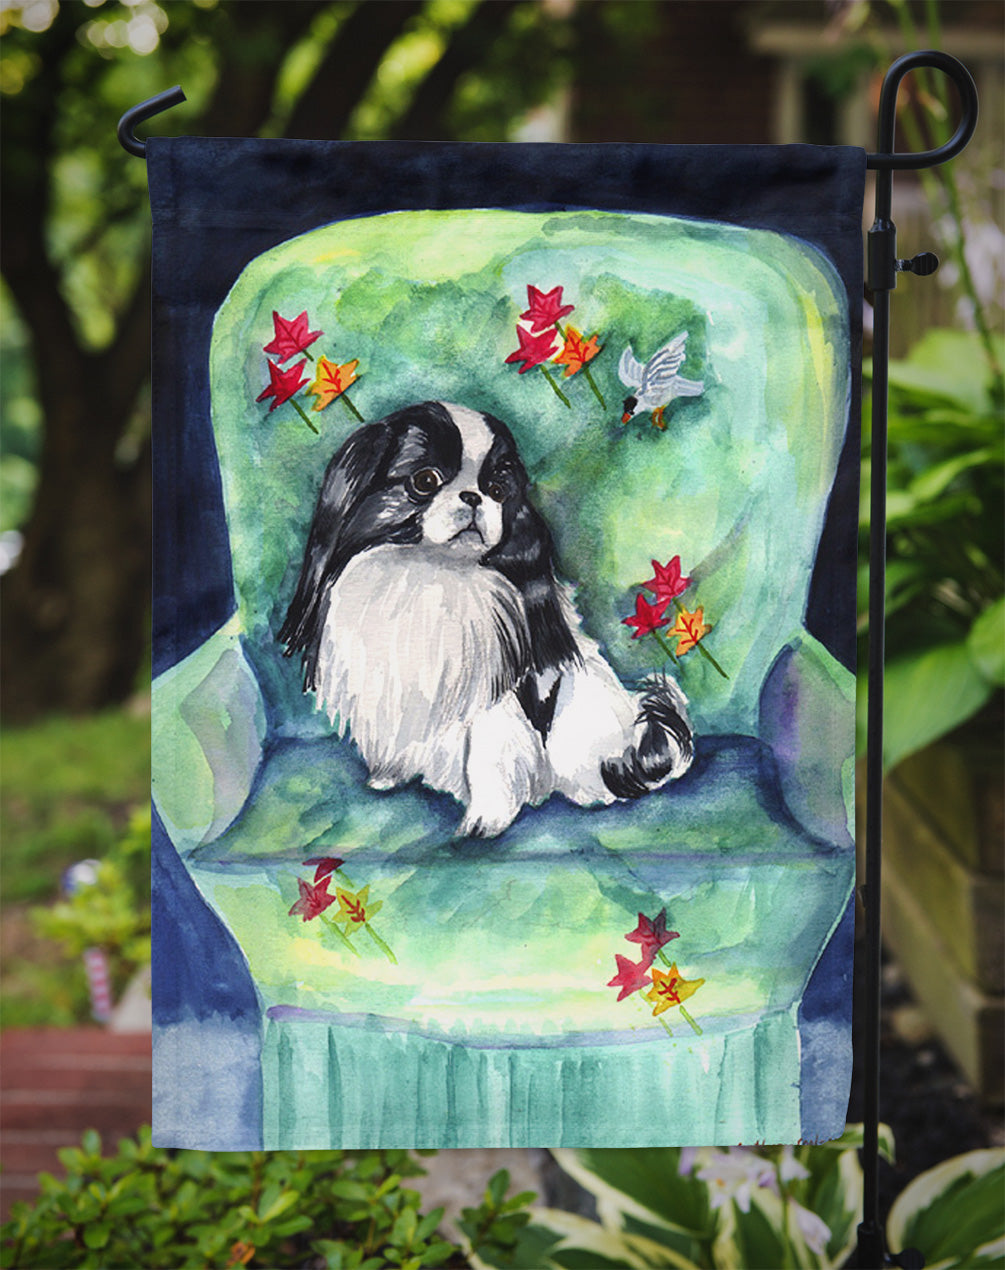 Japanese Chin in Momma's Chair Flag Garden Size.